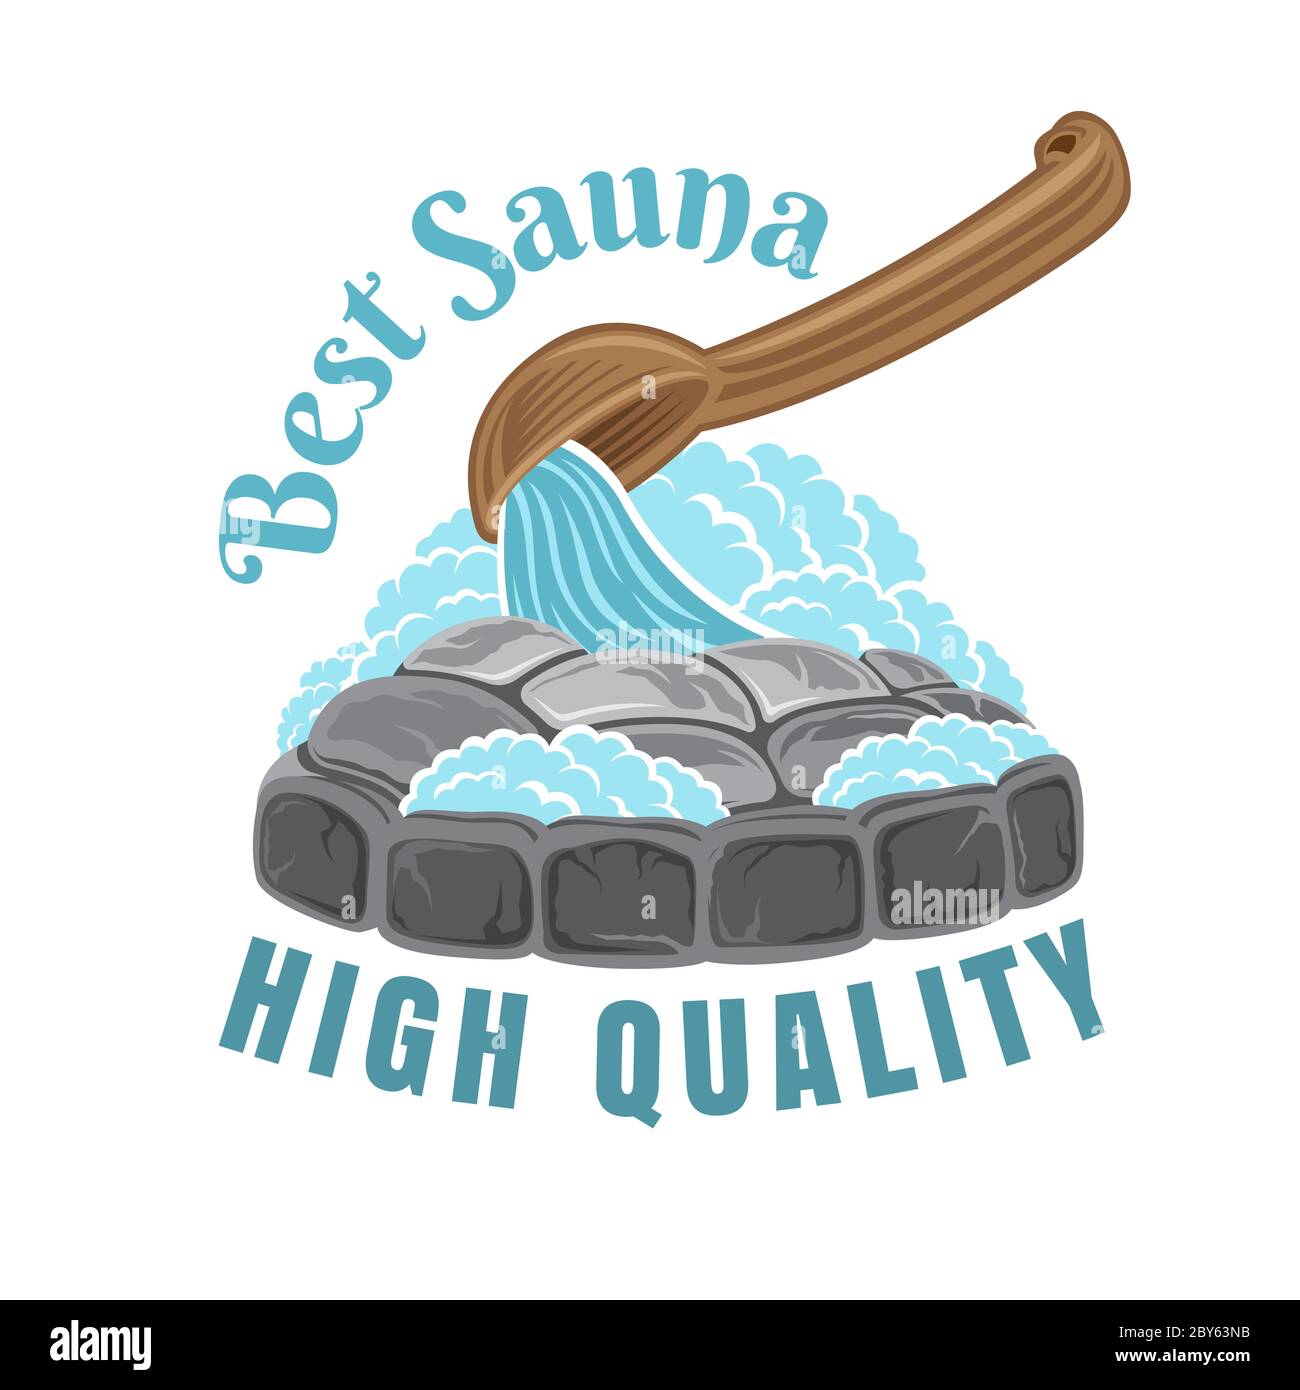 Lable for sauna, banya or bathhouse. Wooden ladle for sauna poure water hot stones with steam around. Color vector illustration. Stock Vector